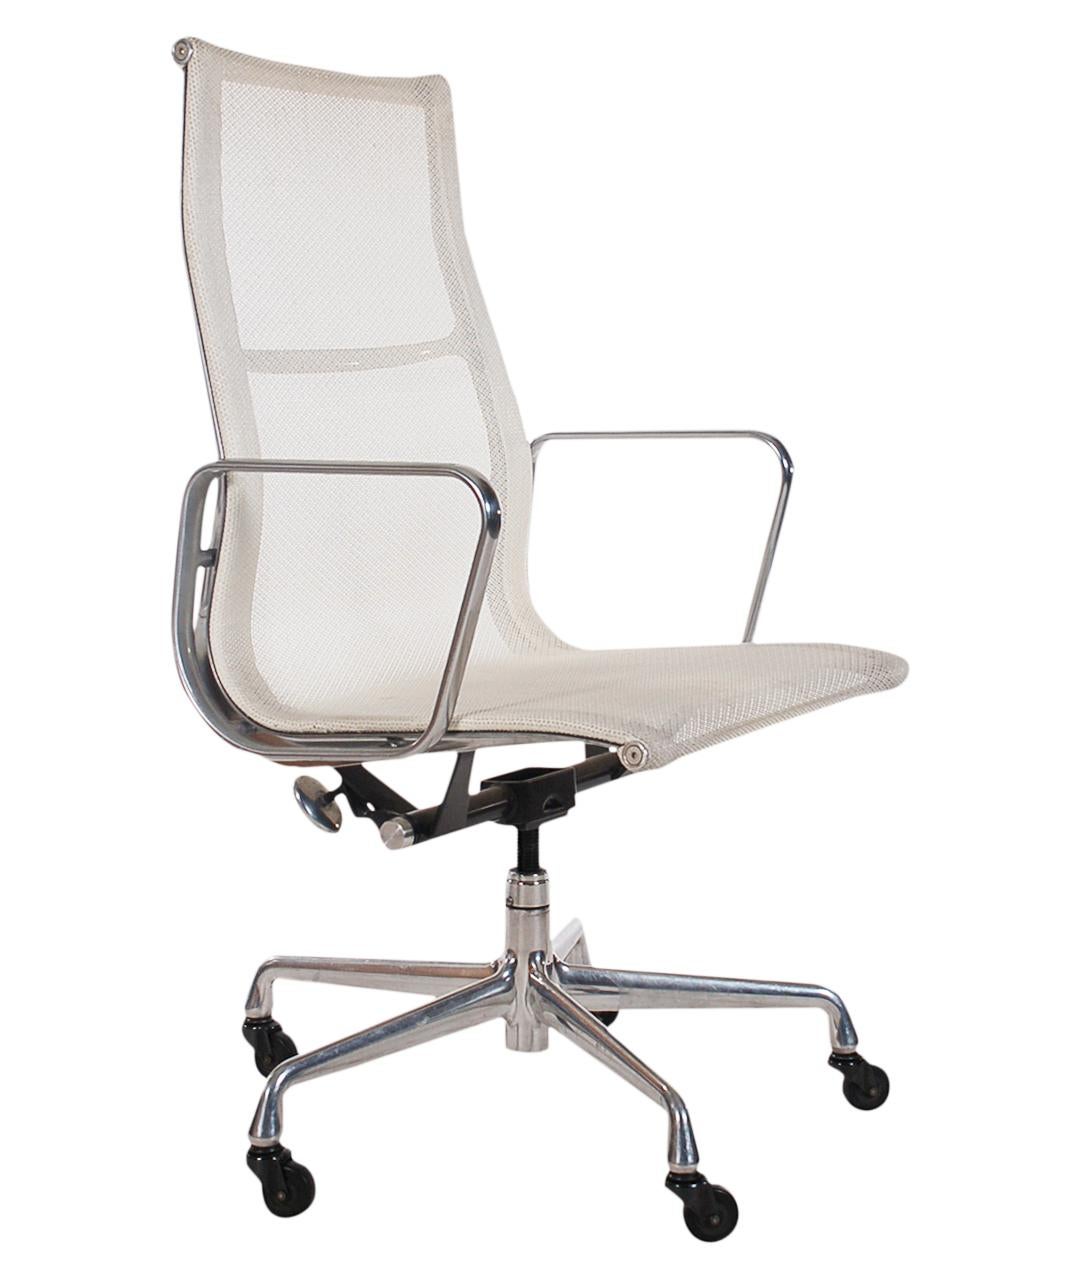 A Classic design by Charles Eames and produced by Herman Miller. This chair features an adjustable aluminum frame, casters for easy tasking, and a white mesh sling seating area. Extremely comfortable. We currently have 2 chairs in stock and they are